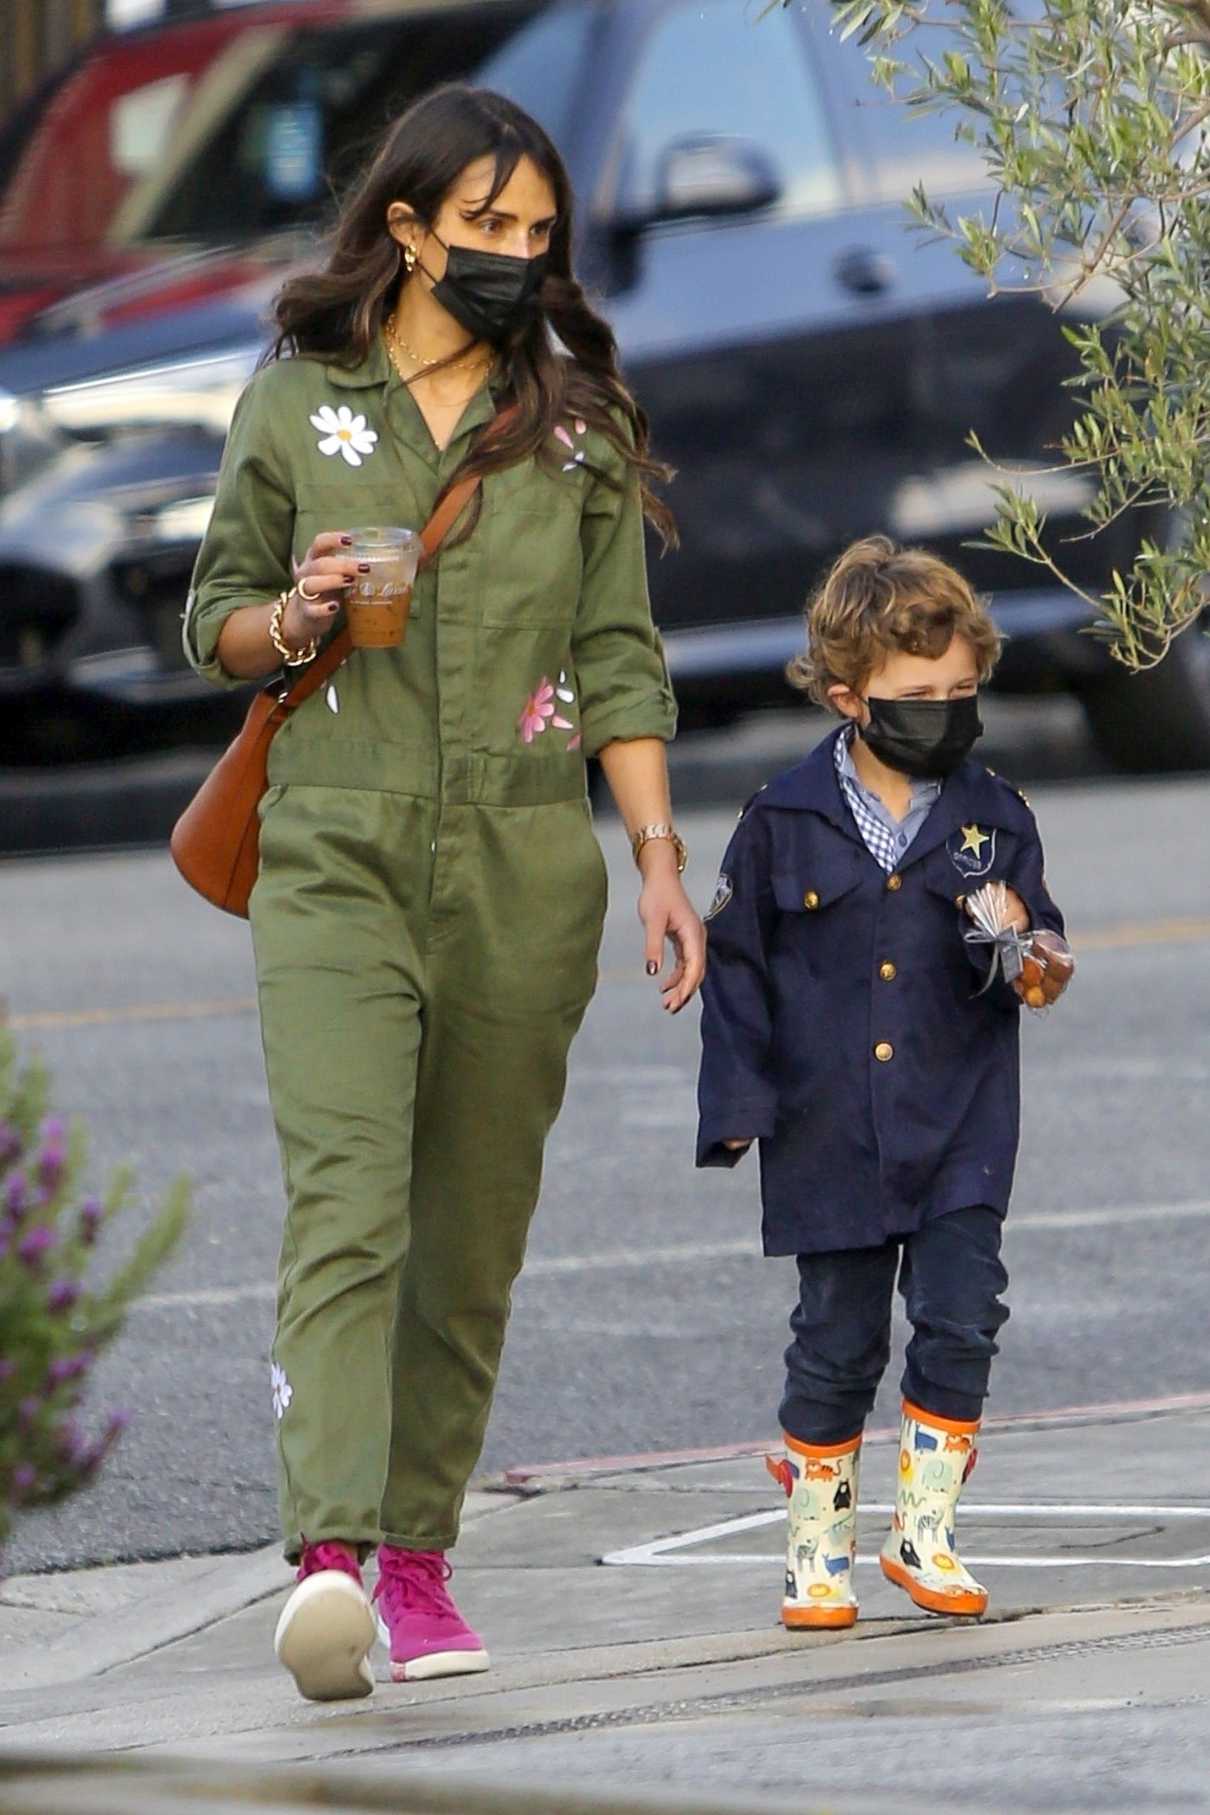 Jordana Brewster in an Olive Jumpsuit Was Seen Out with Her Son in Los ...